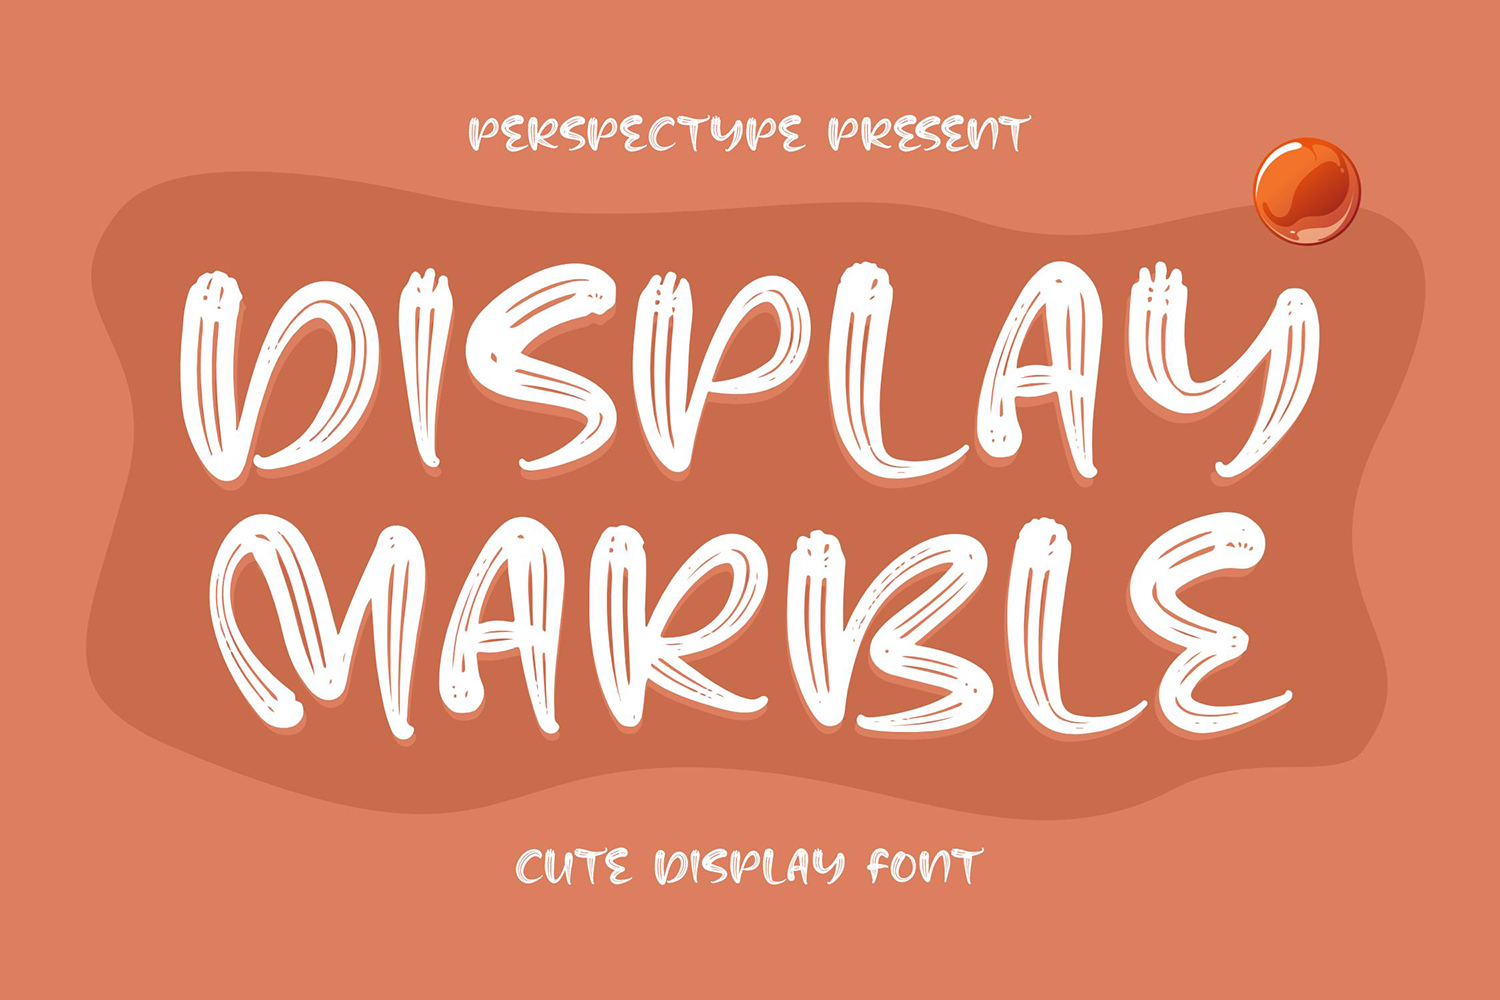 Display Marble Free Font